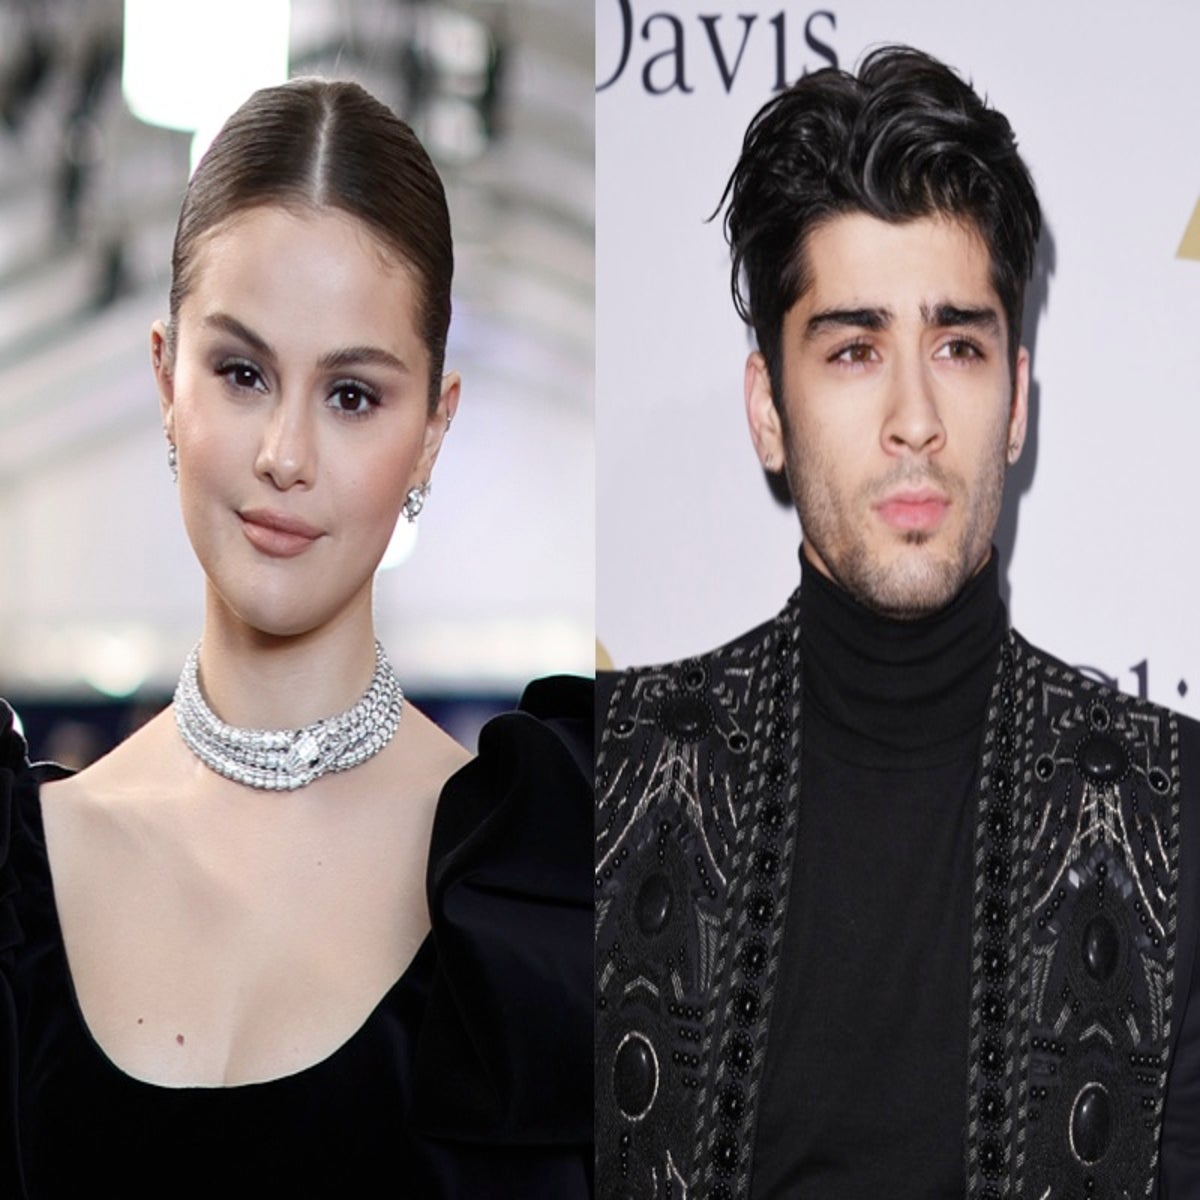 Sellena Bella Free Sex Videos - Fans react to Selena Gomez and Zayn Malik dating rumours: 'I'm here for  this' | The Independent